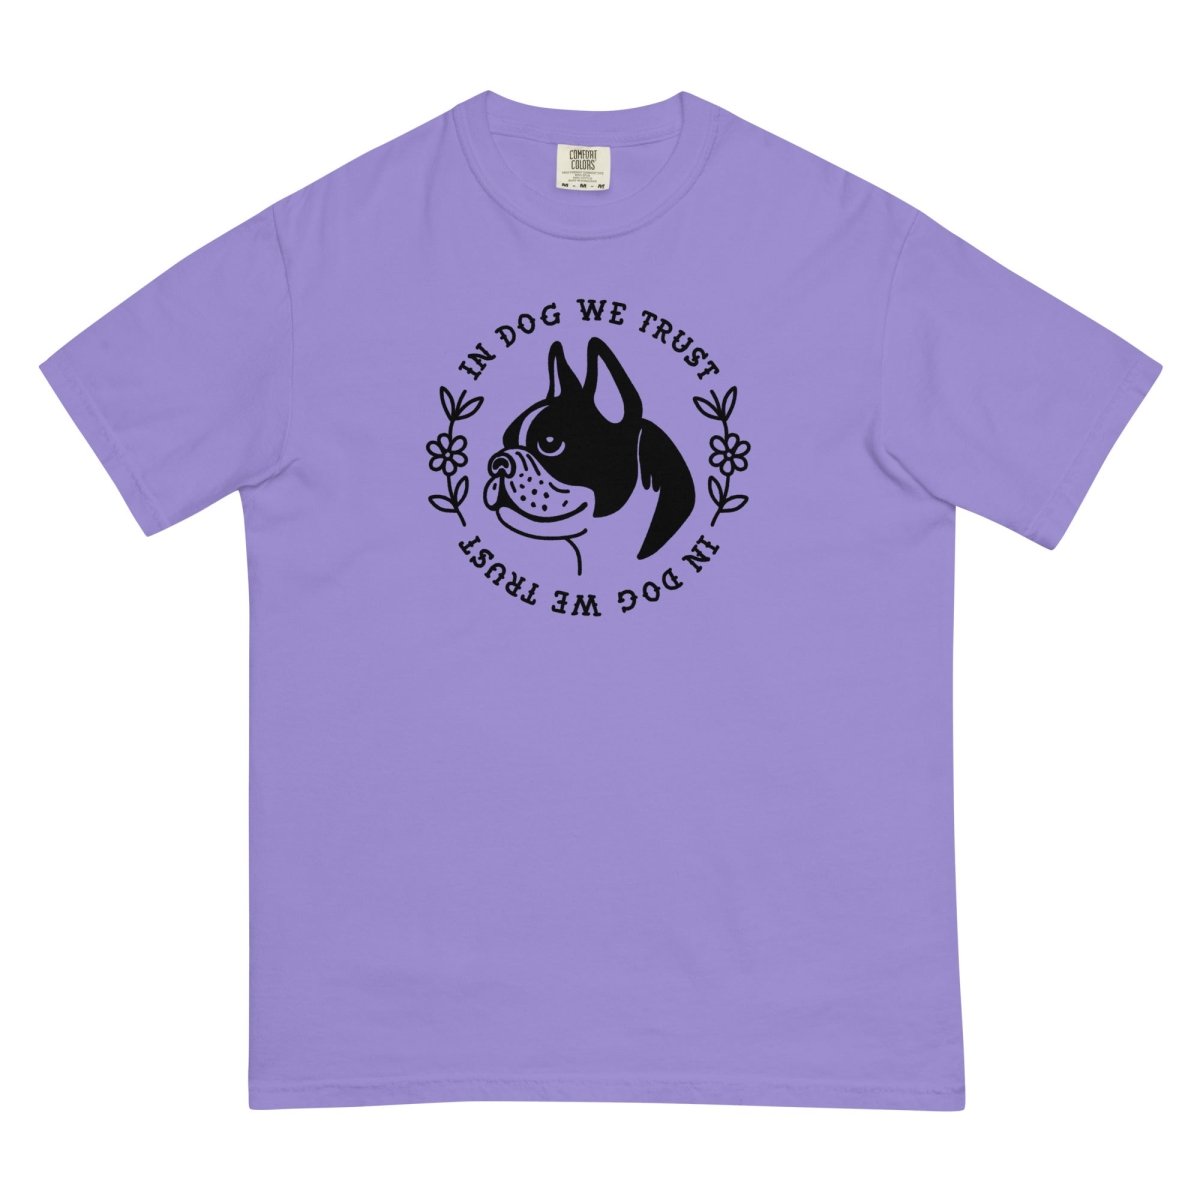 In dog we trust t-shirt - Pretty Bad Co.